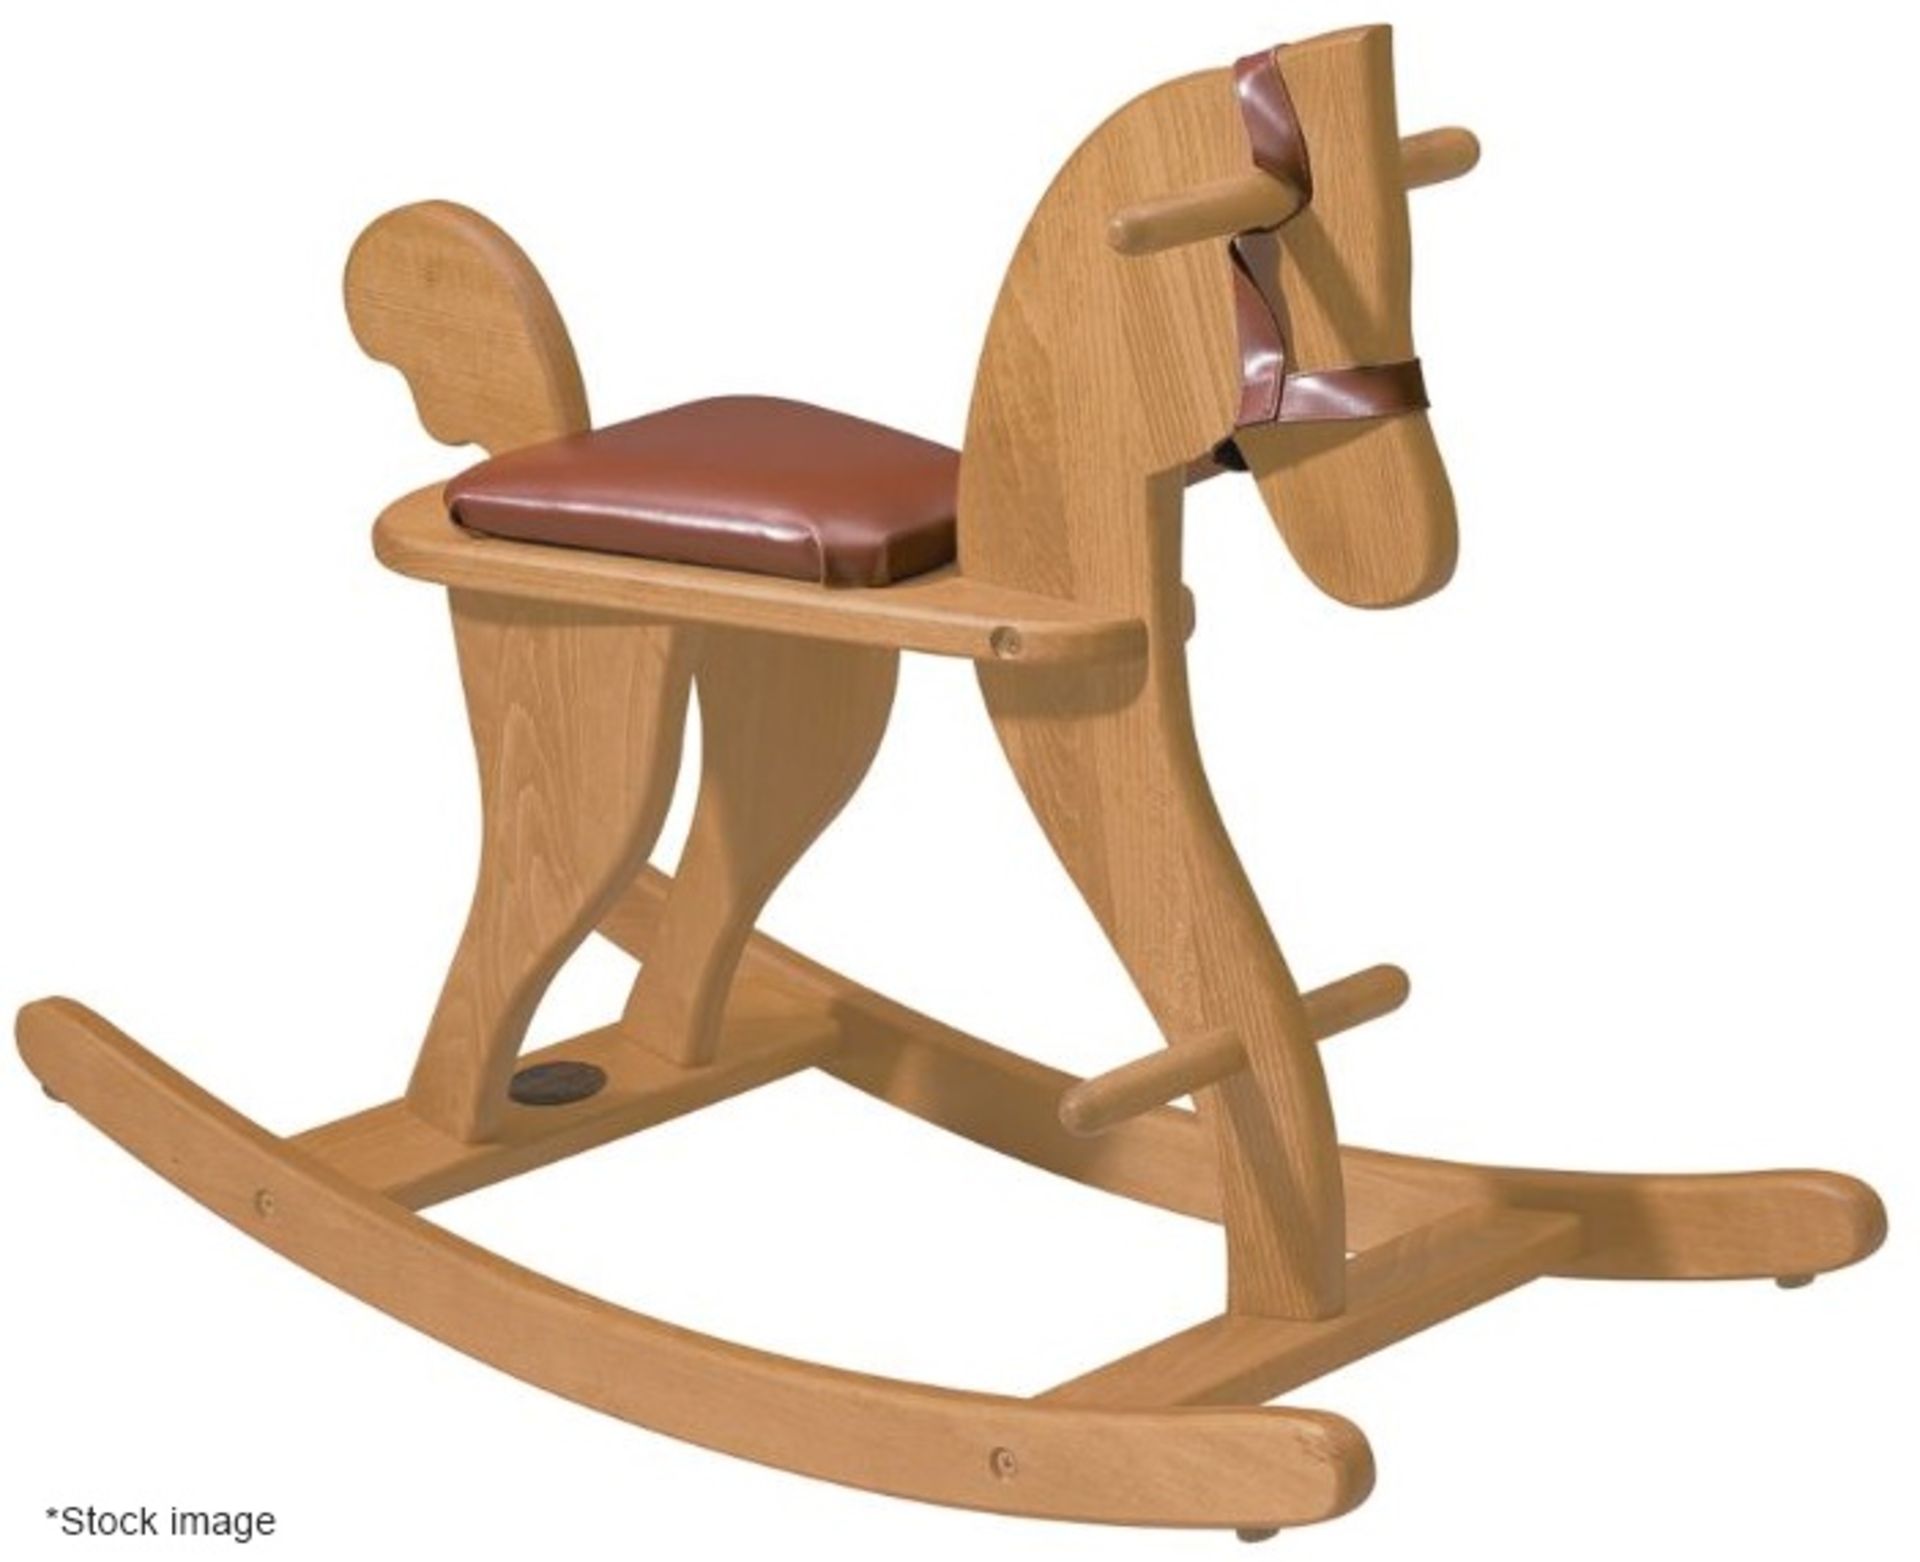 1 x MOULIN ROTY Luxury Wooden Rocking Horse - Original Price £129.00 - Unused Boxed Stock